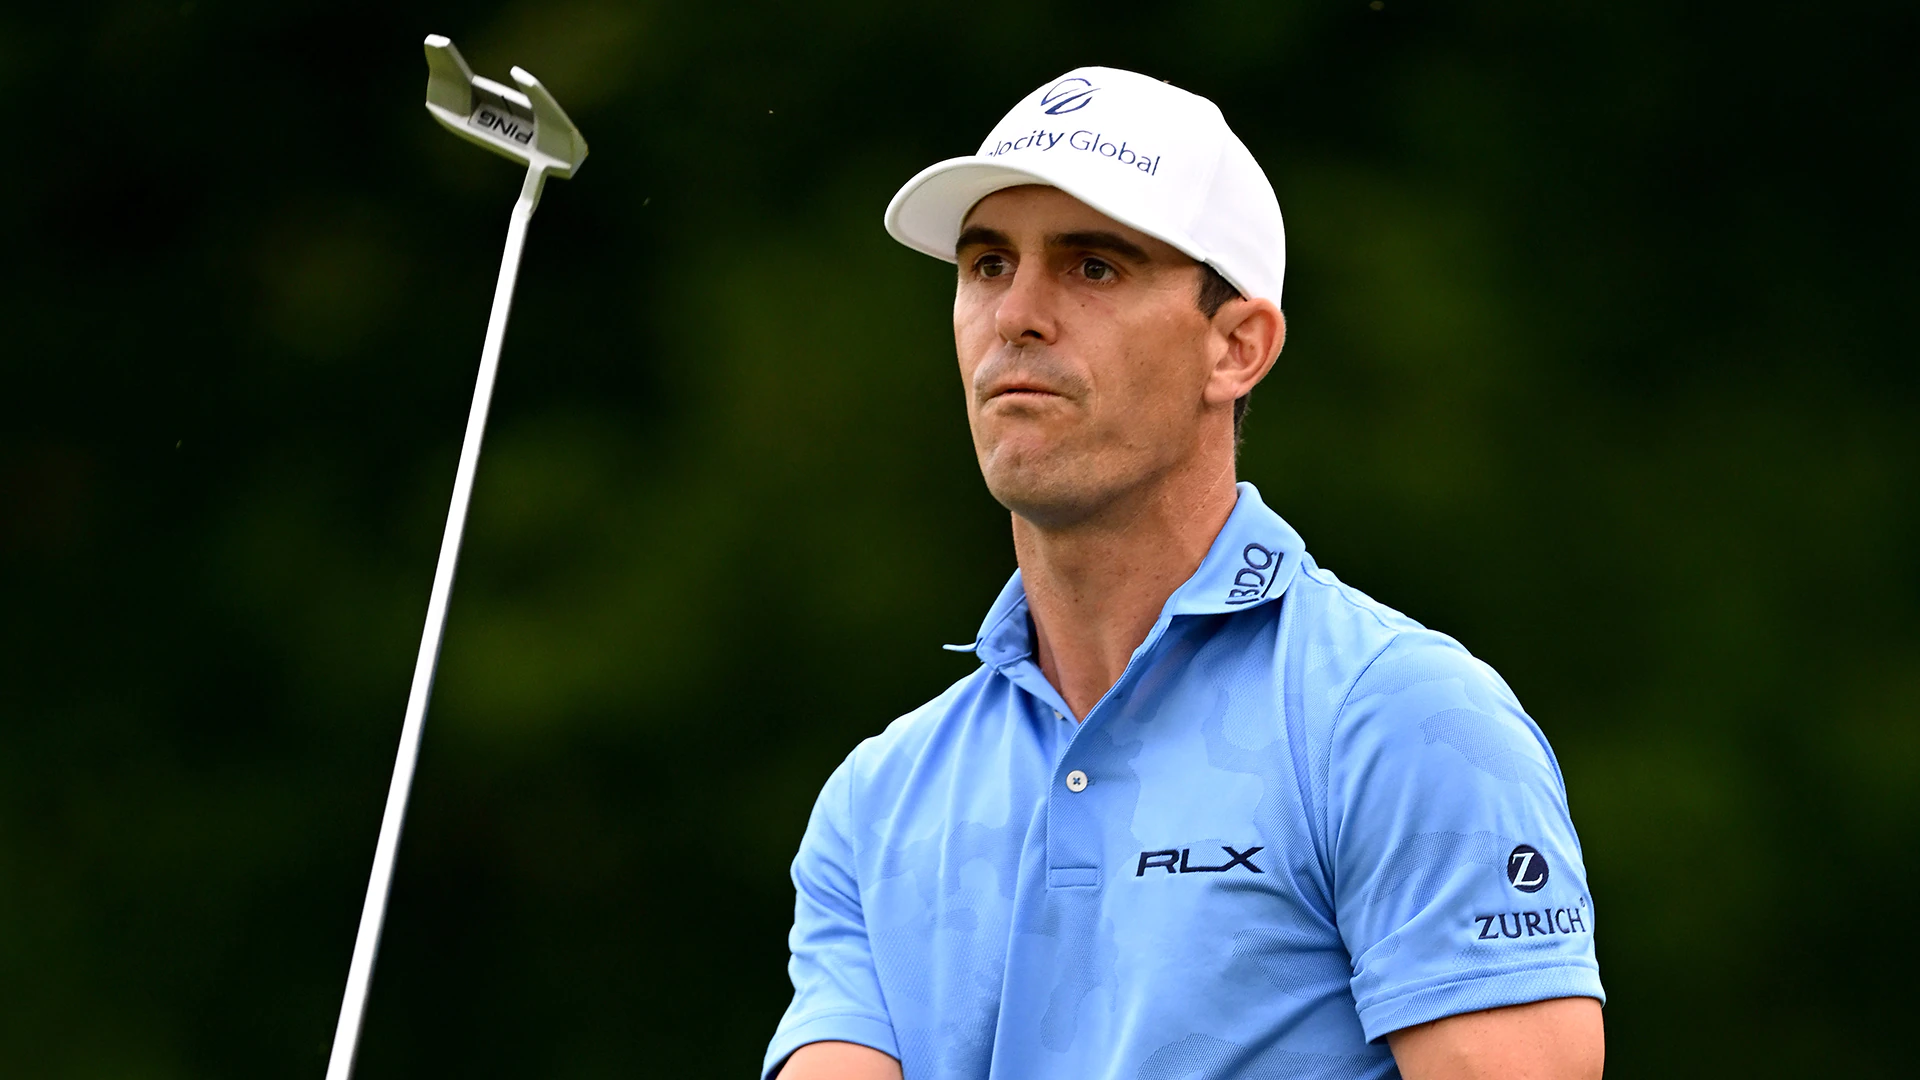 Billy Horschel: Some LIV players are ‘brainwashed’; Judge’s ruling was ‘small vindication’